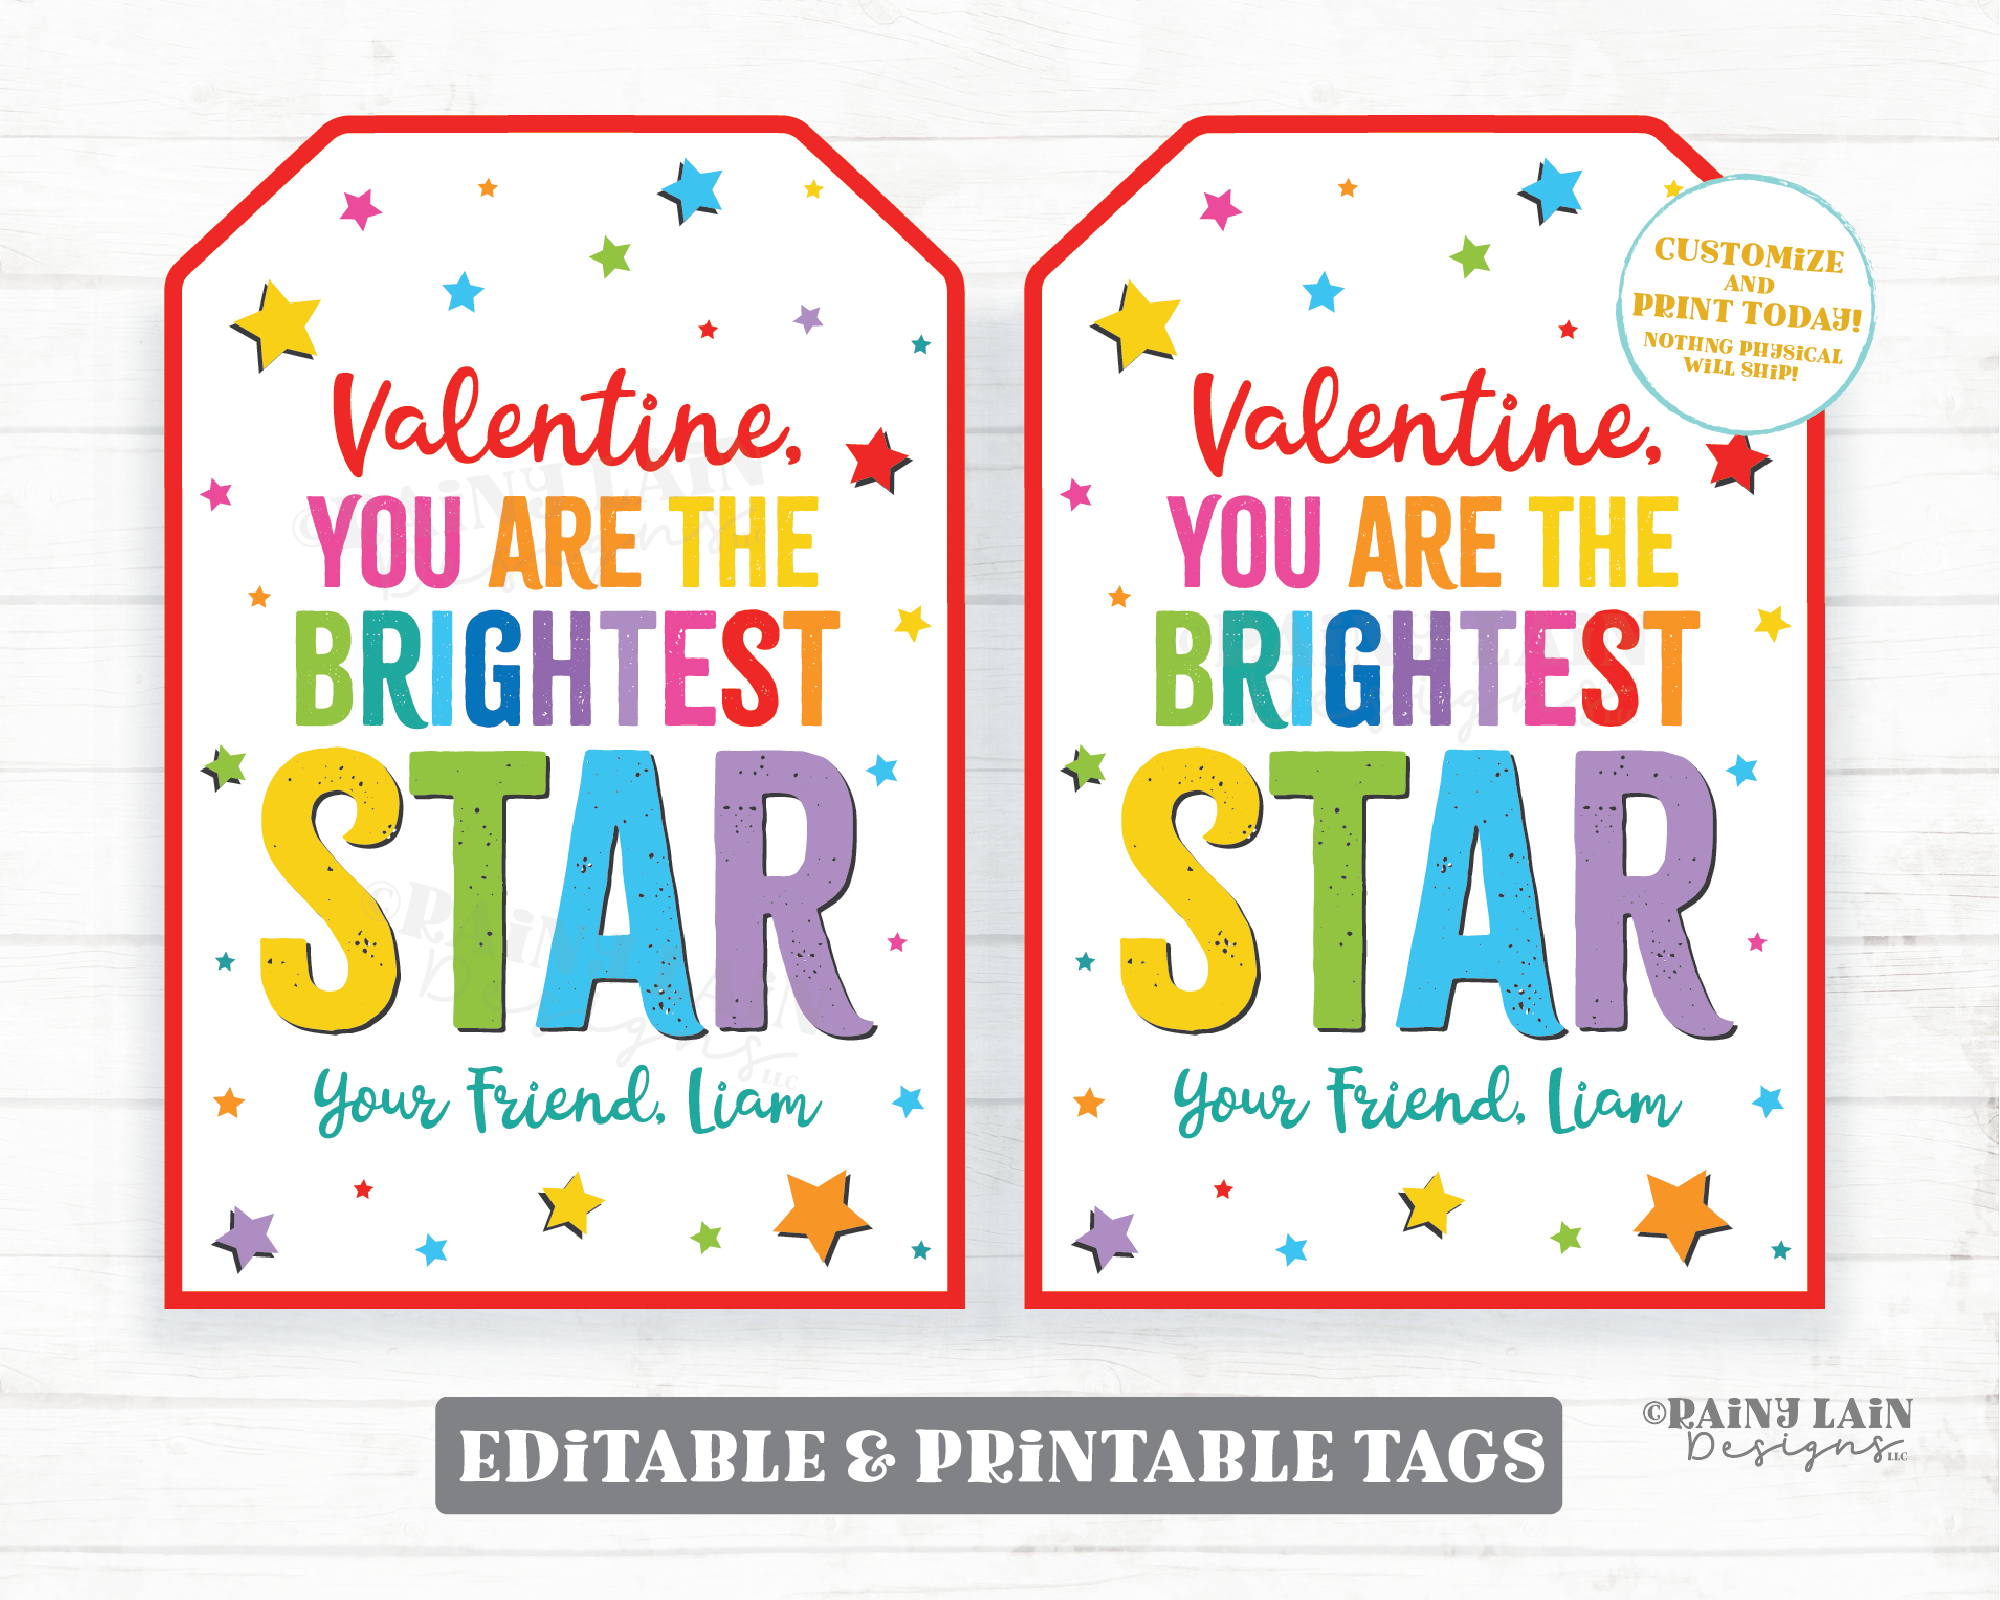 Valentine You're the Brightest Star Valentine's Day Tag Glow in the Dark Stars You're a Star Preschool Classroom Printable Kids Non-Candy